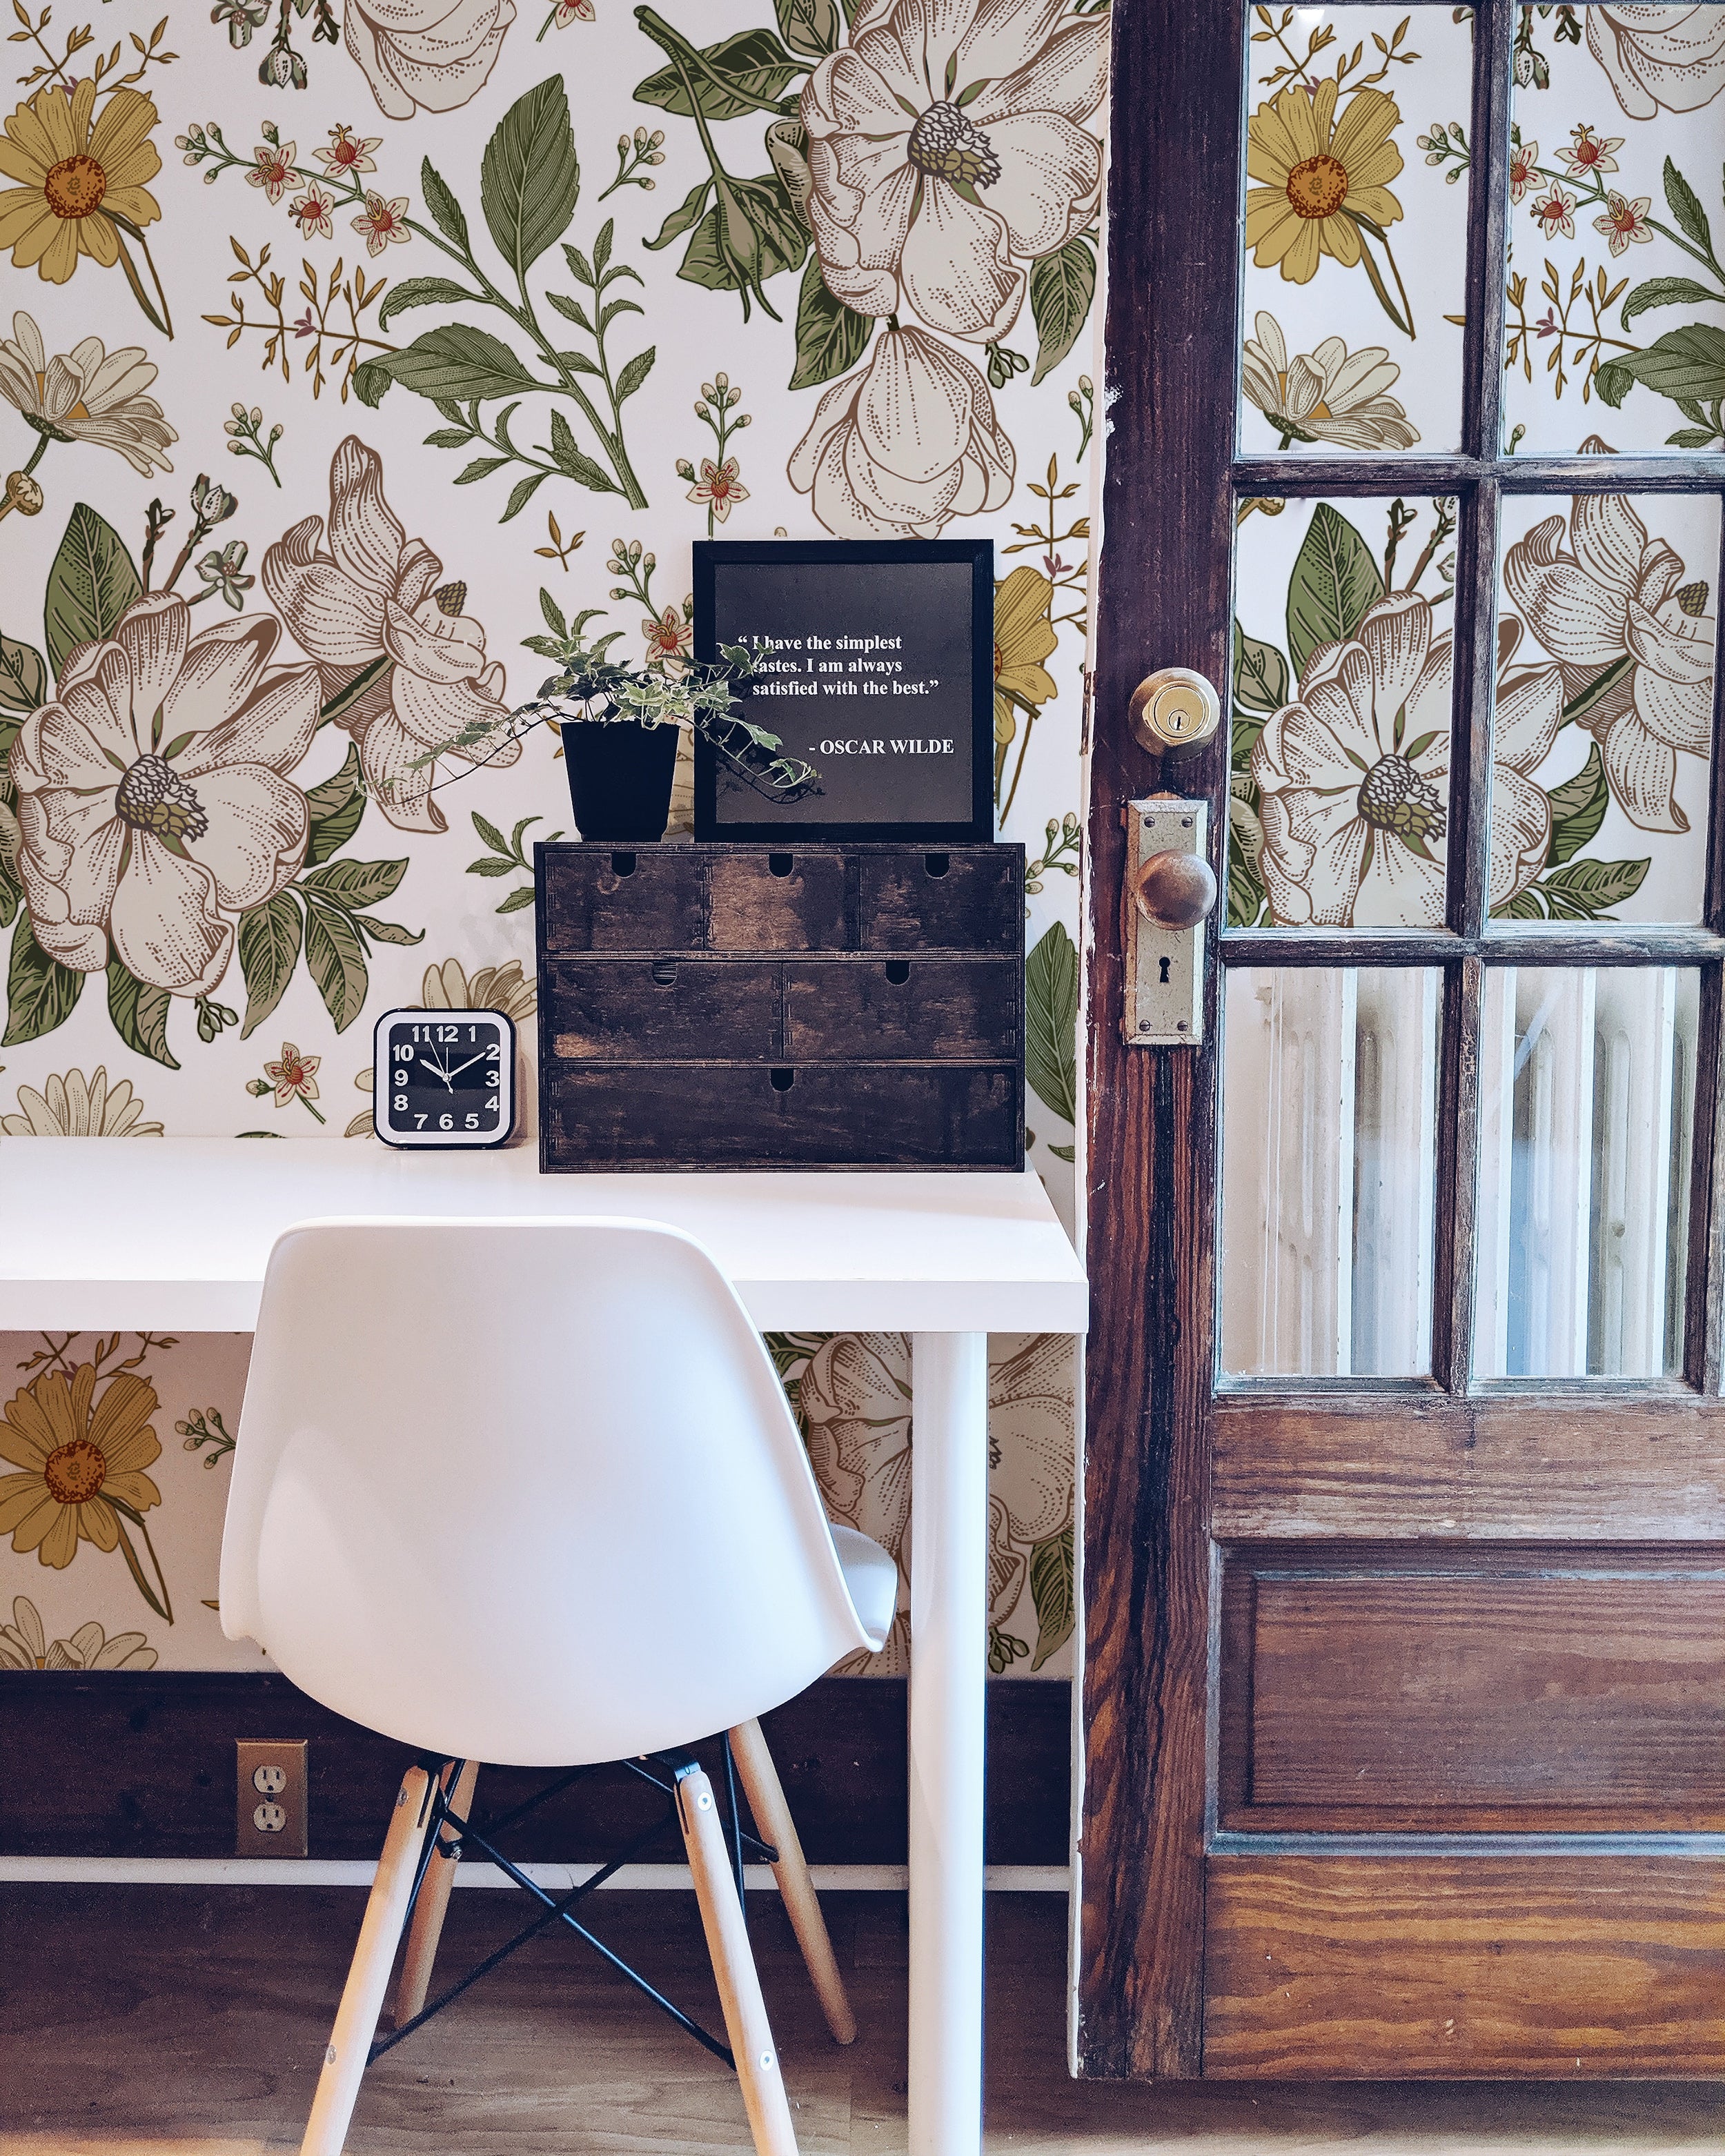 an image showcasing the "Floral Wallpaper - Sunny II" in an office space. The wallpaper is patterned with large, sunny floral illustrations in warm tones, giving the space a vibrant yet sophisticated feel. A modern white chair contrasts with the rustic wooden elements in the room, complementing the natural aesthetic of the wallpaper.